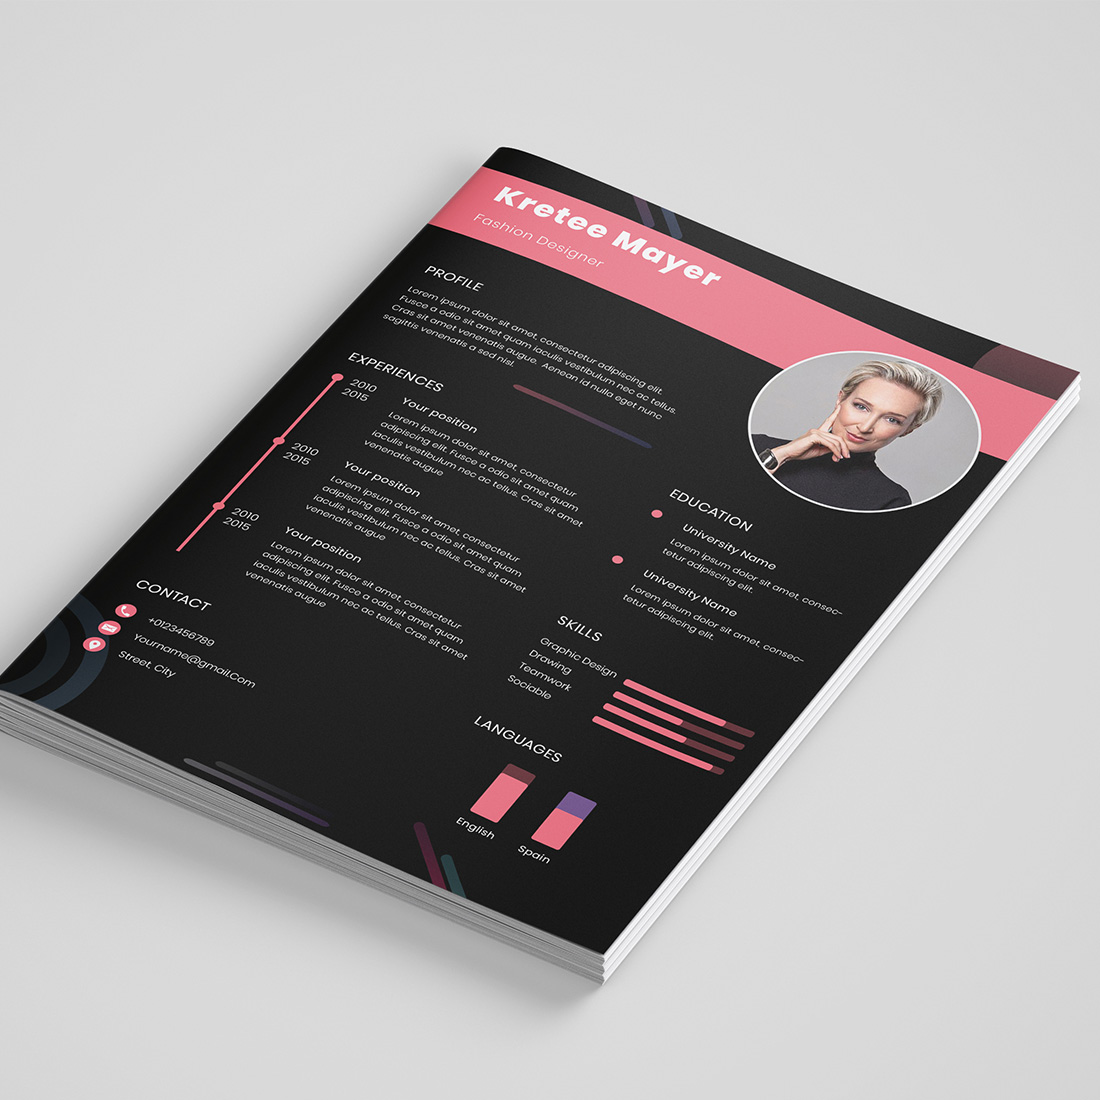 Resume and CV 3 in 1 Bundle preview image.